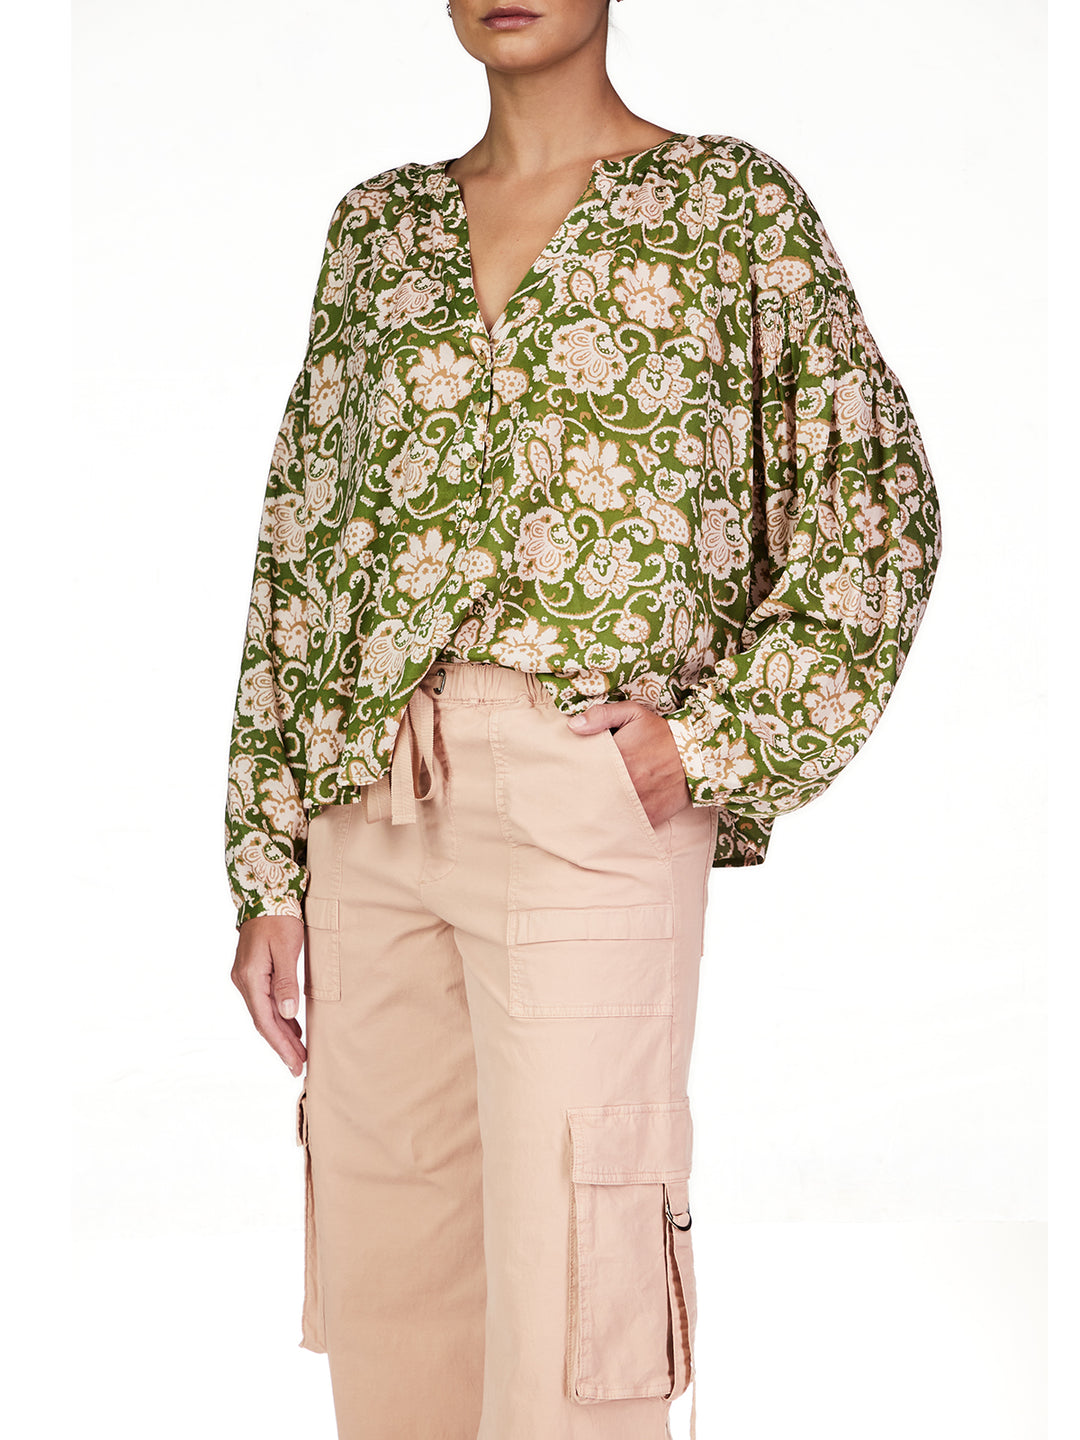 SUNDAY'S BEST TOP-LUSH FLORA - Kingfisher Road - Online Boutique